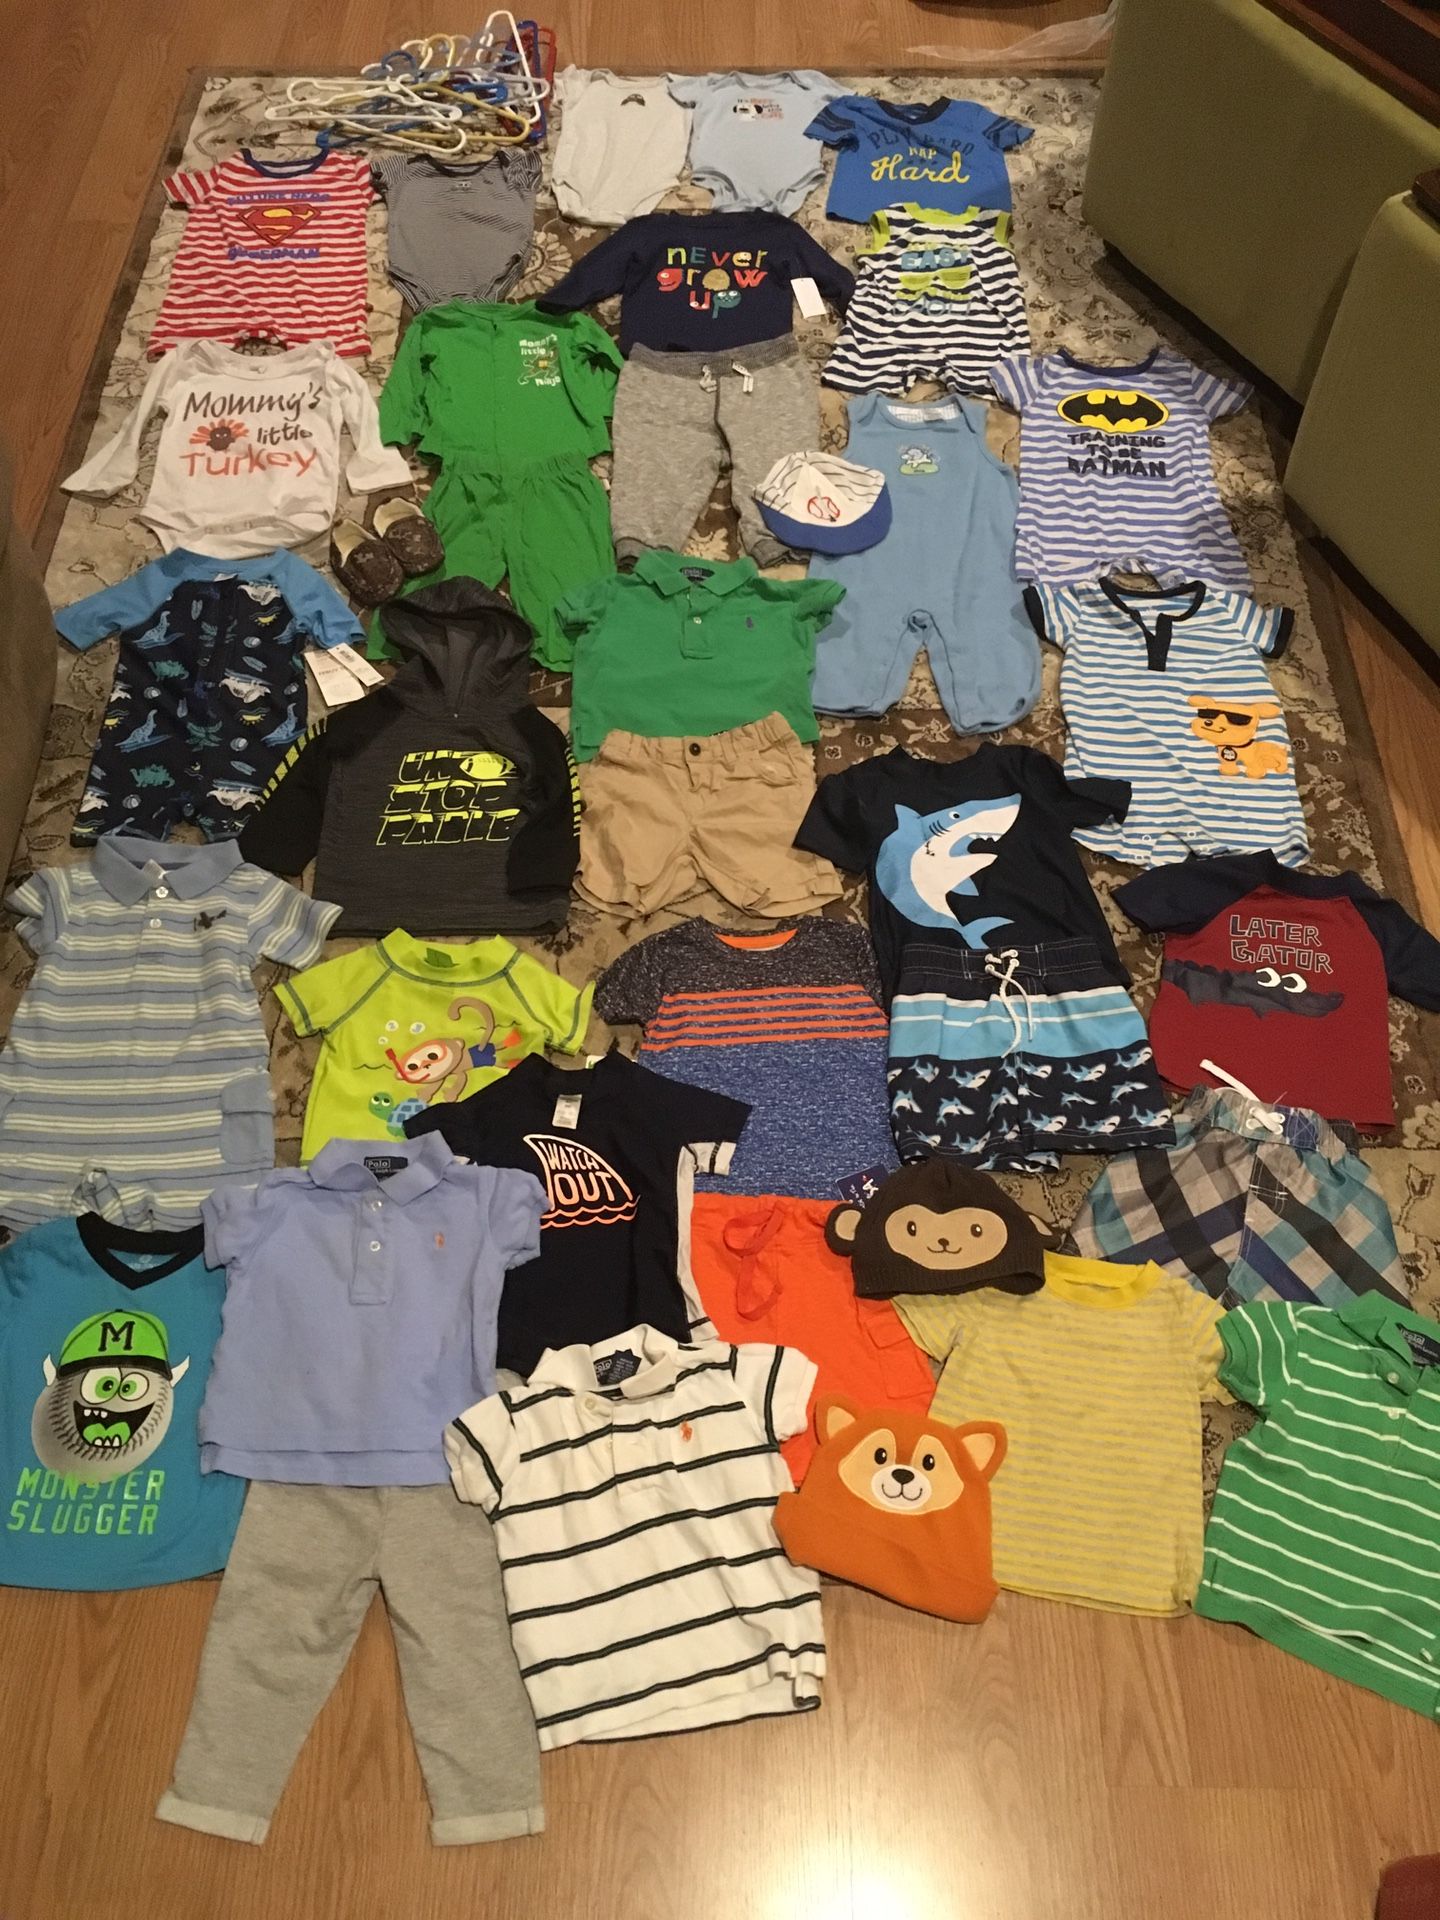 Baby boy 6-9 month clothes. 33 items of clothing, a pair of camouflage slippers, 3 hats and 12 hangers